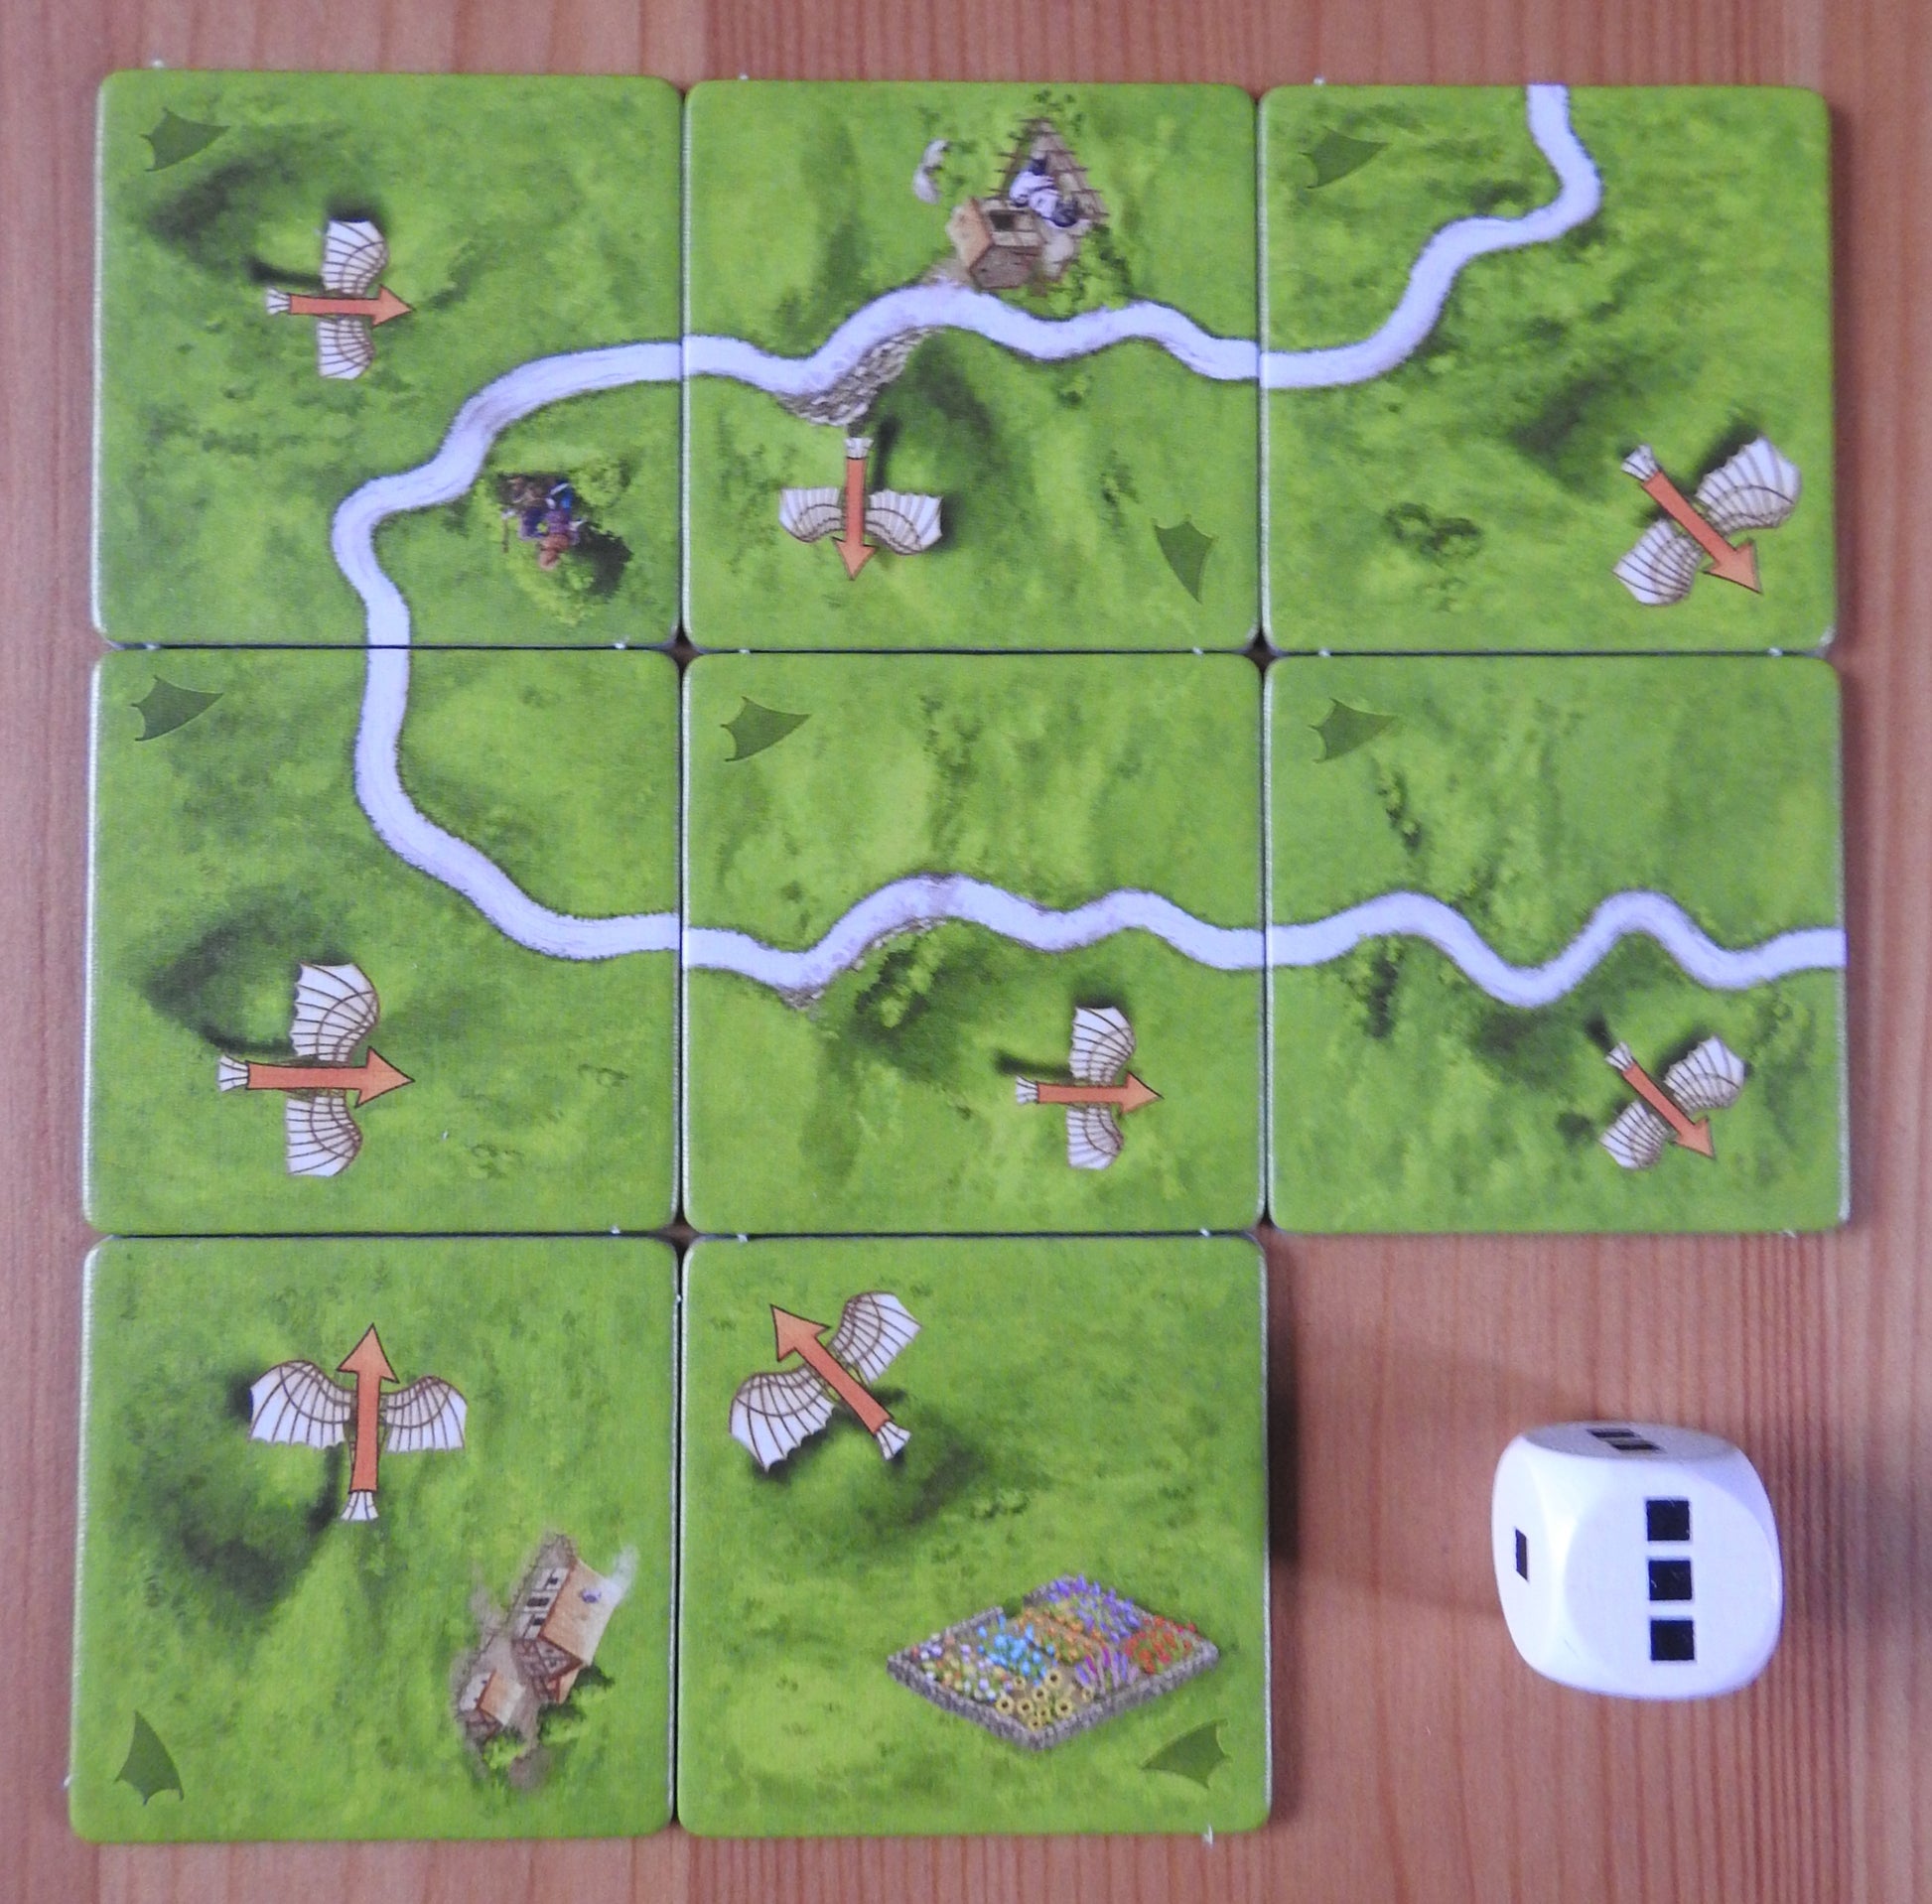 View of all the tiles and the die included in this Carcassonne Flying Machines mini expansion.